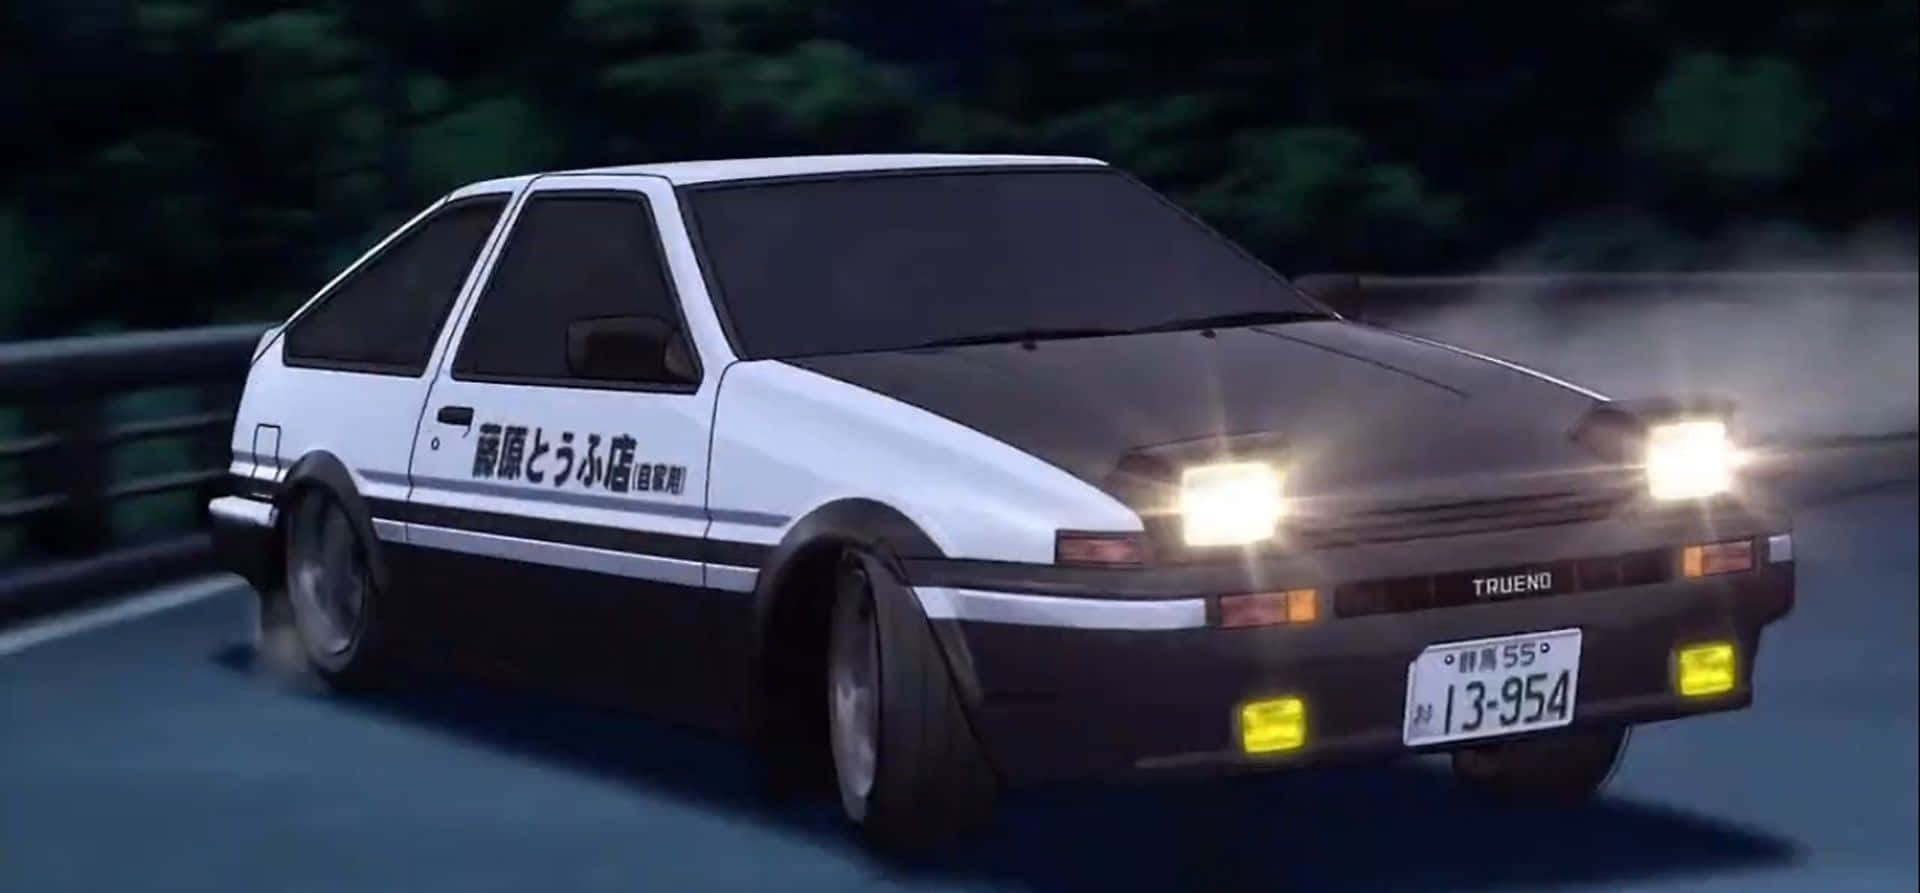 Toyotaae86 Lyse Forlygter Initial D Baggrund